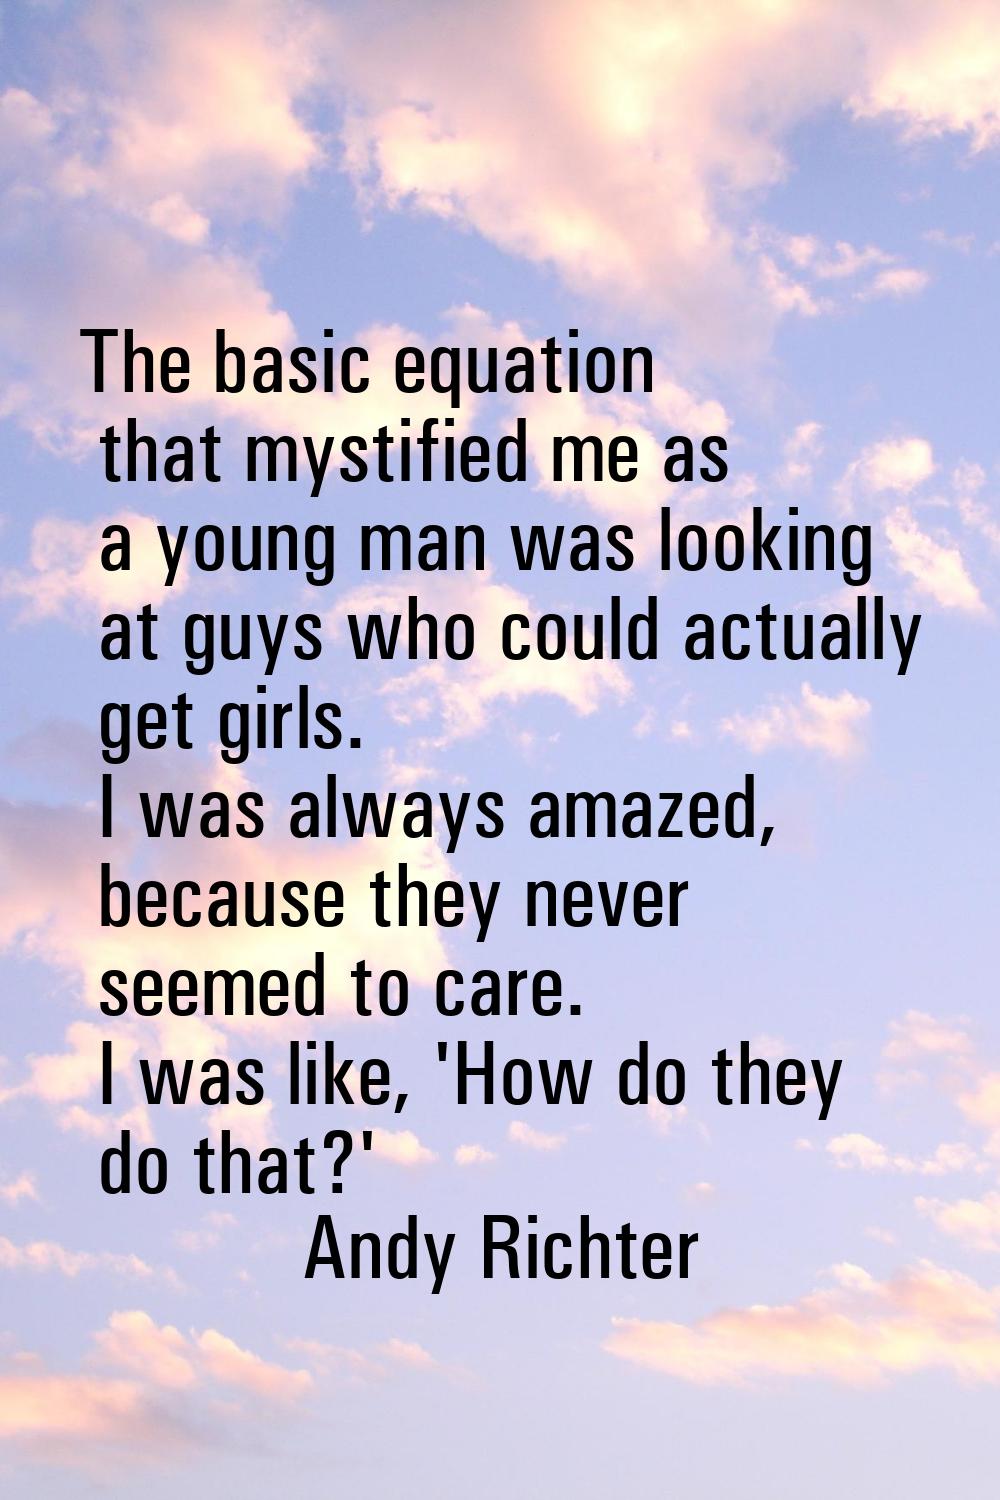 The basic equation that mystified me as a young man was looking at guys who could actually get girl